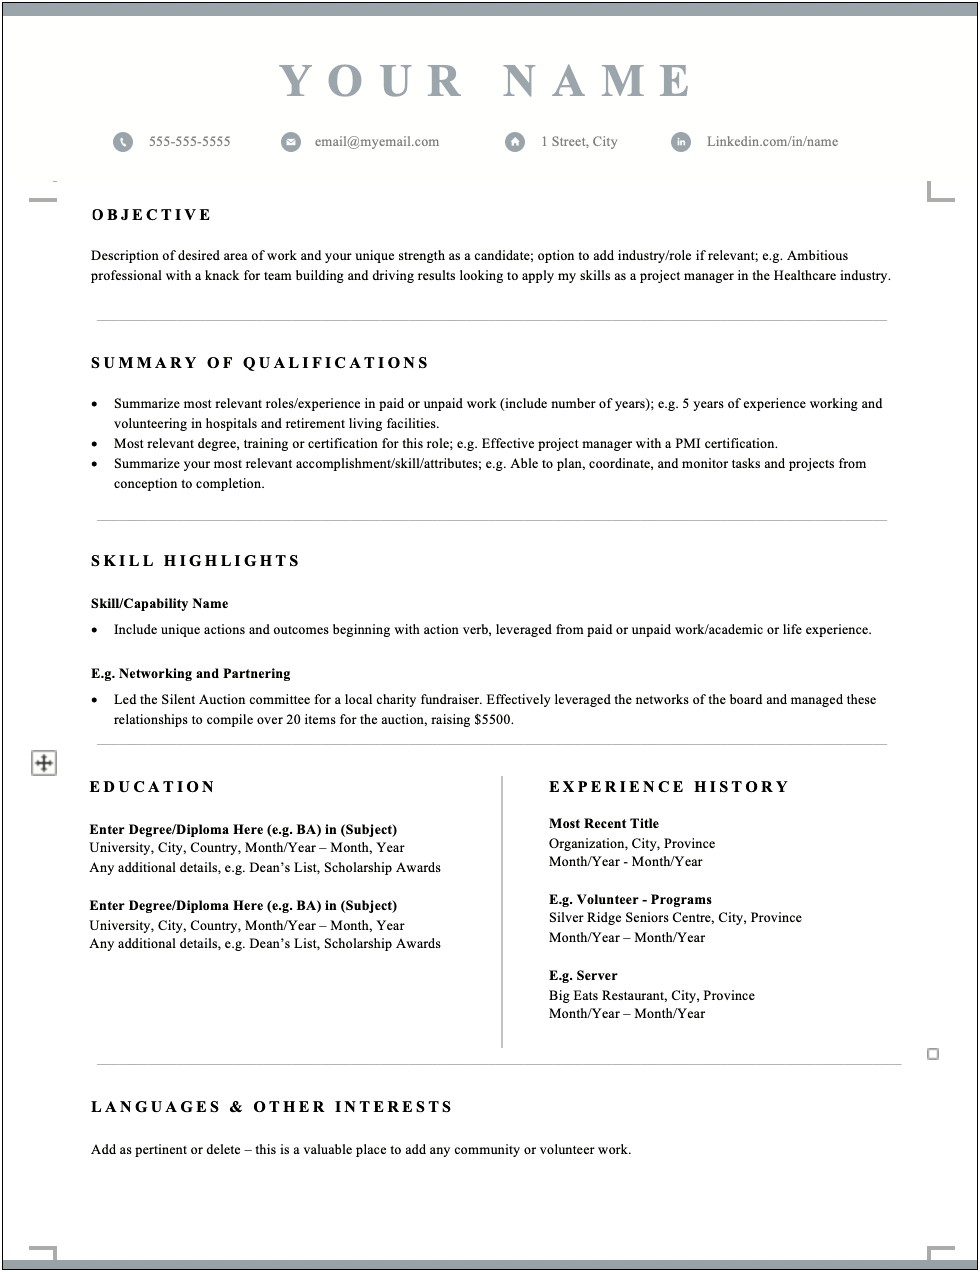 Best Sites To Post Resume Canada